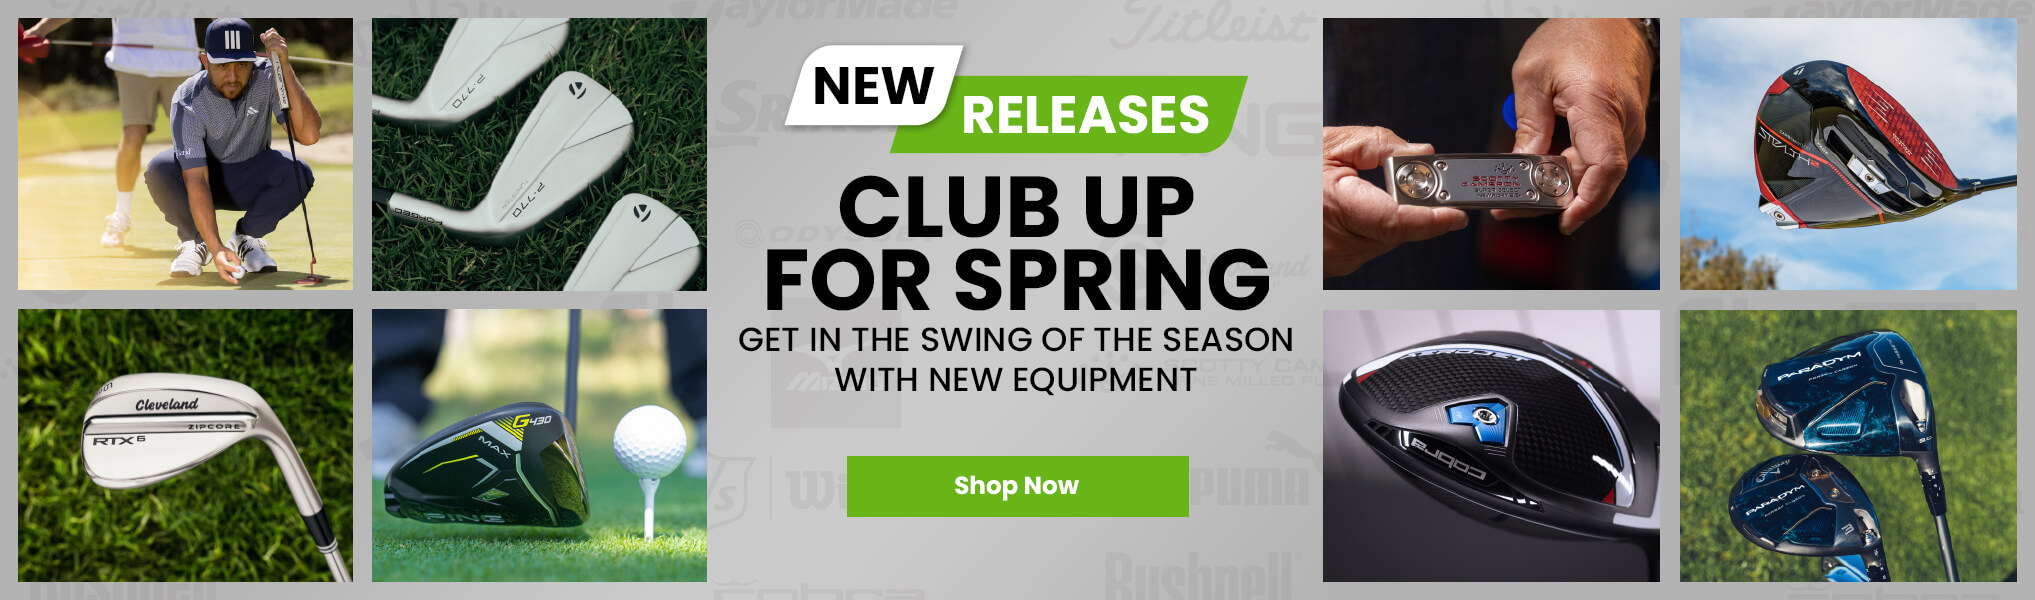 New Golf Clubs for Spring